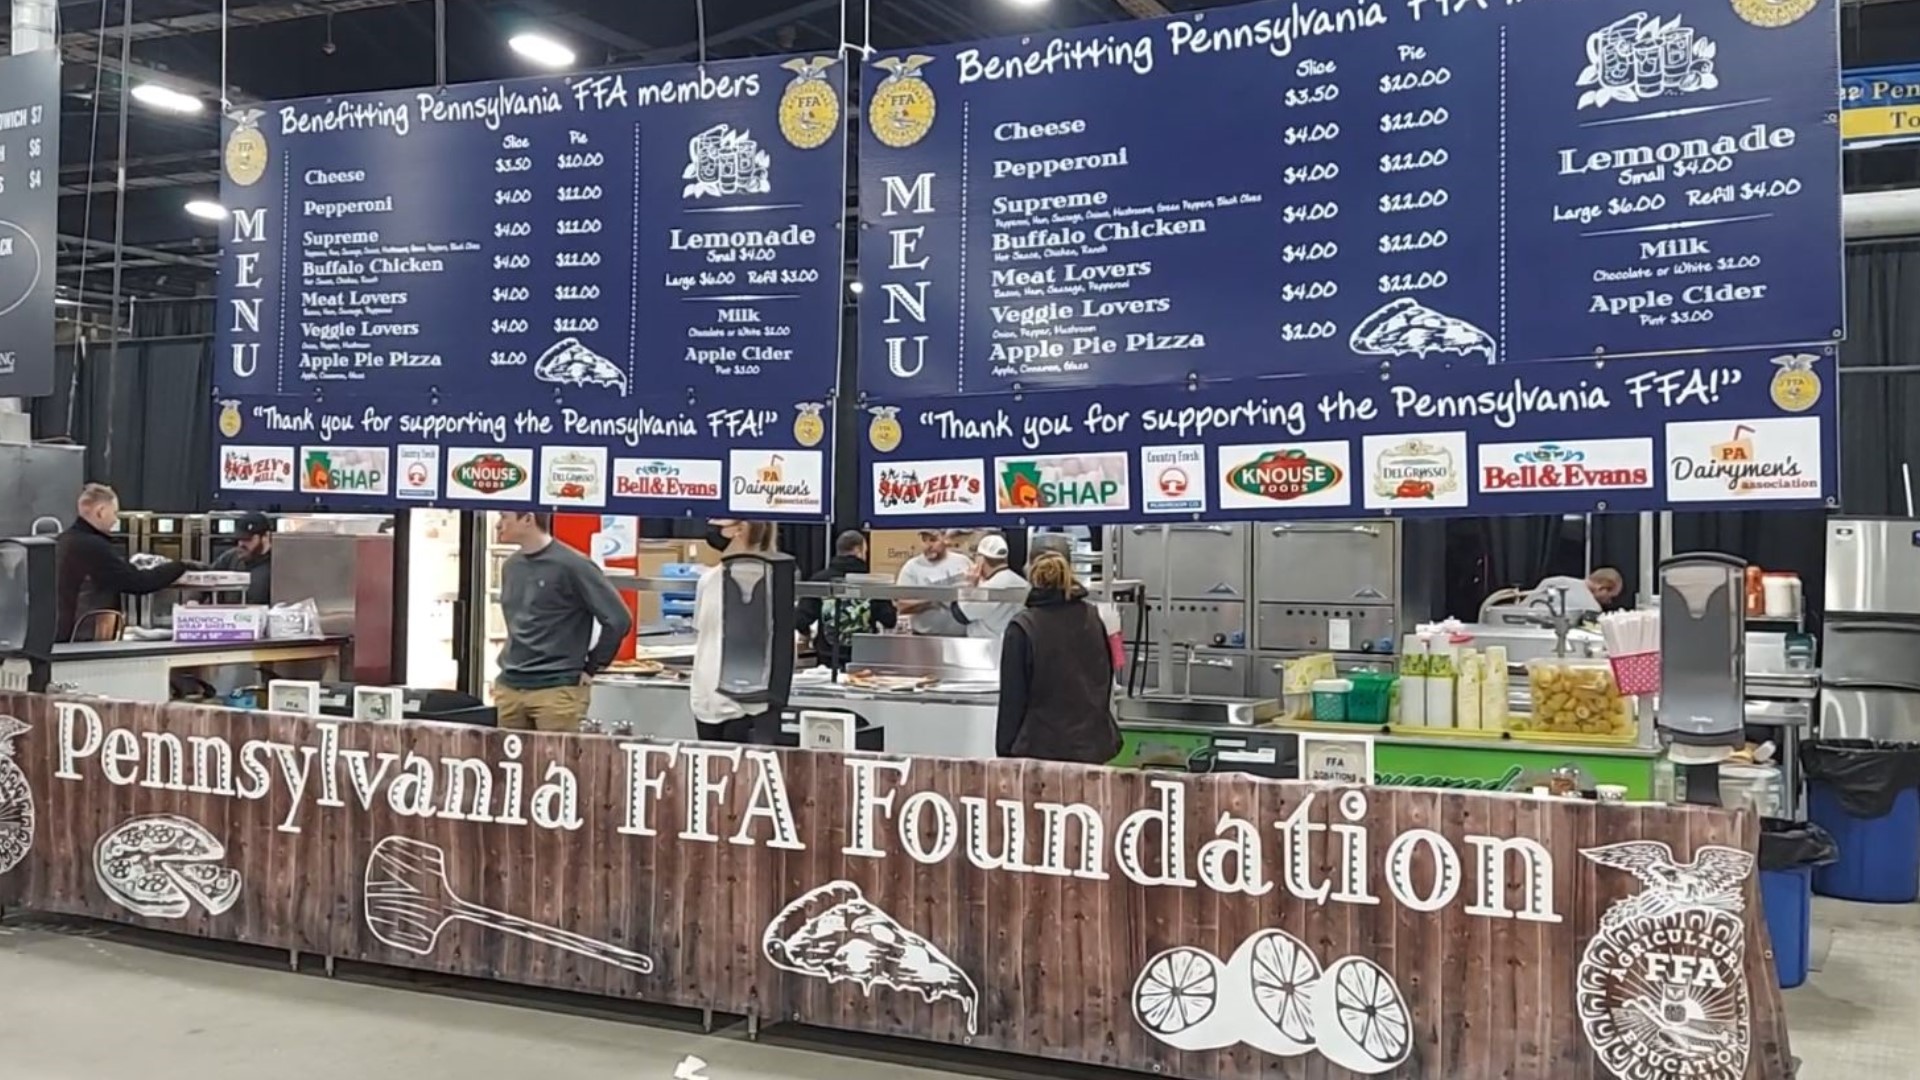 Farm Show officials say the new exhibits show off Pennsylvania's commitment to agriculture. The event kicks off Saturday, Jan. 7.